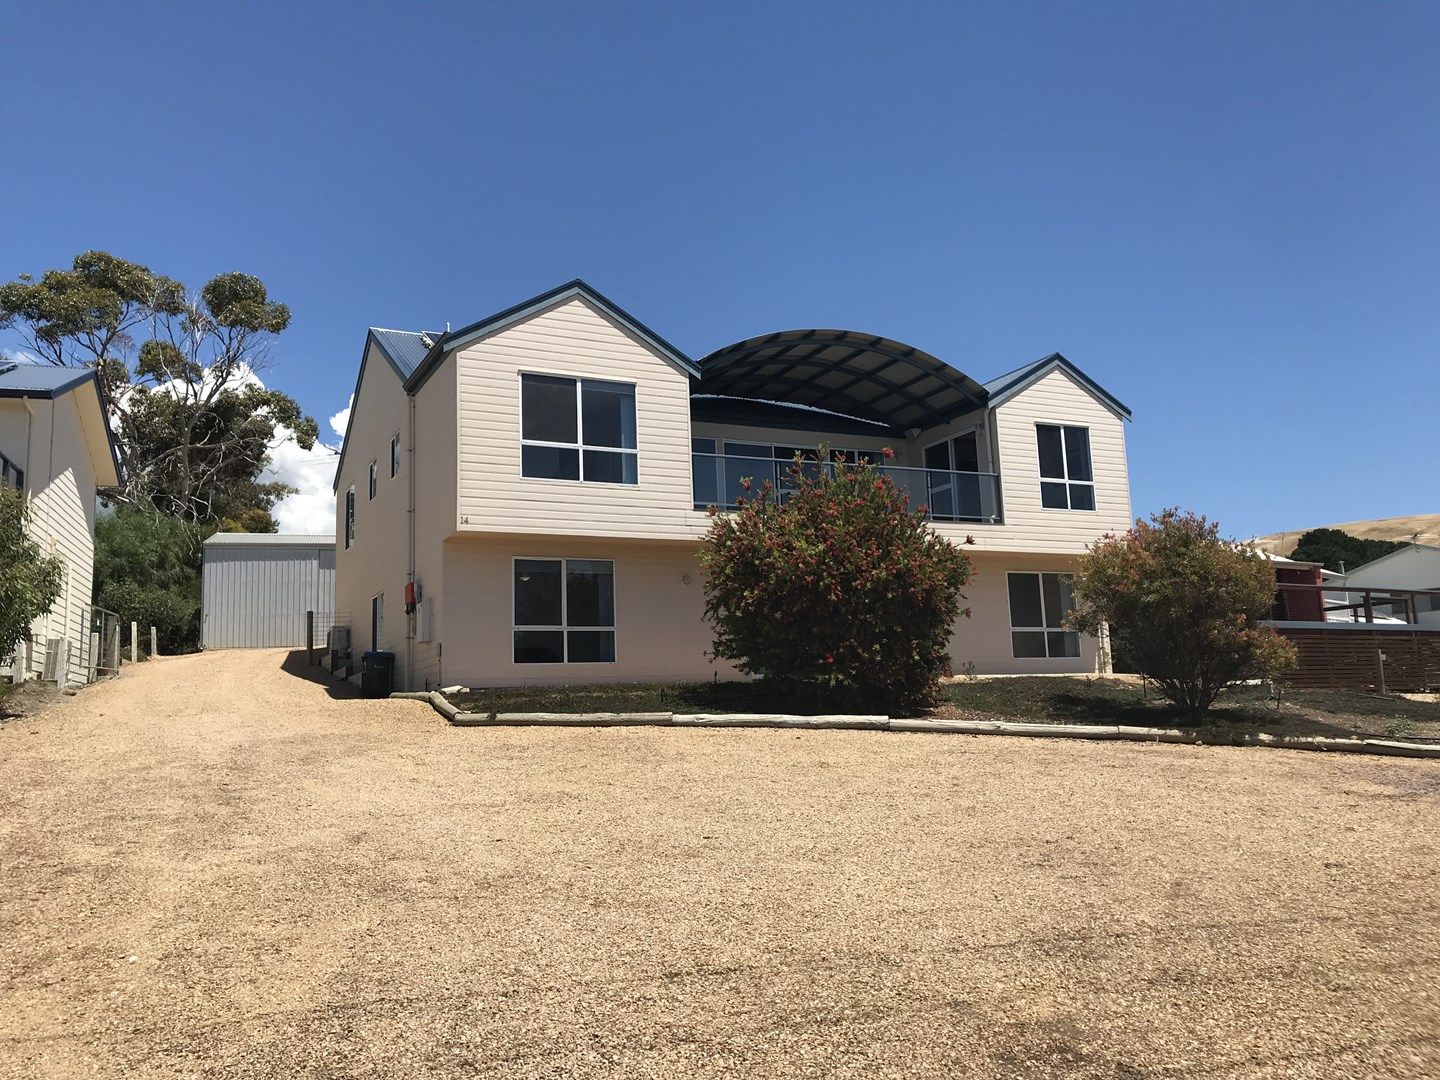 14 Scenic View Drive, Second Valley SA 5204, Image 0